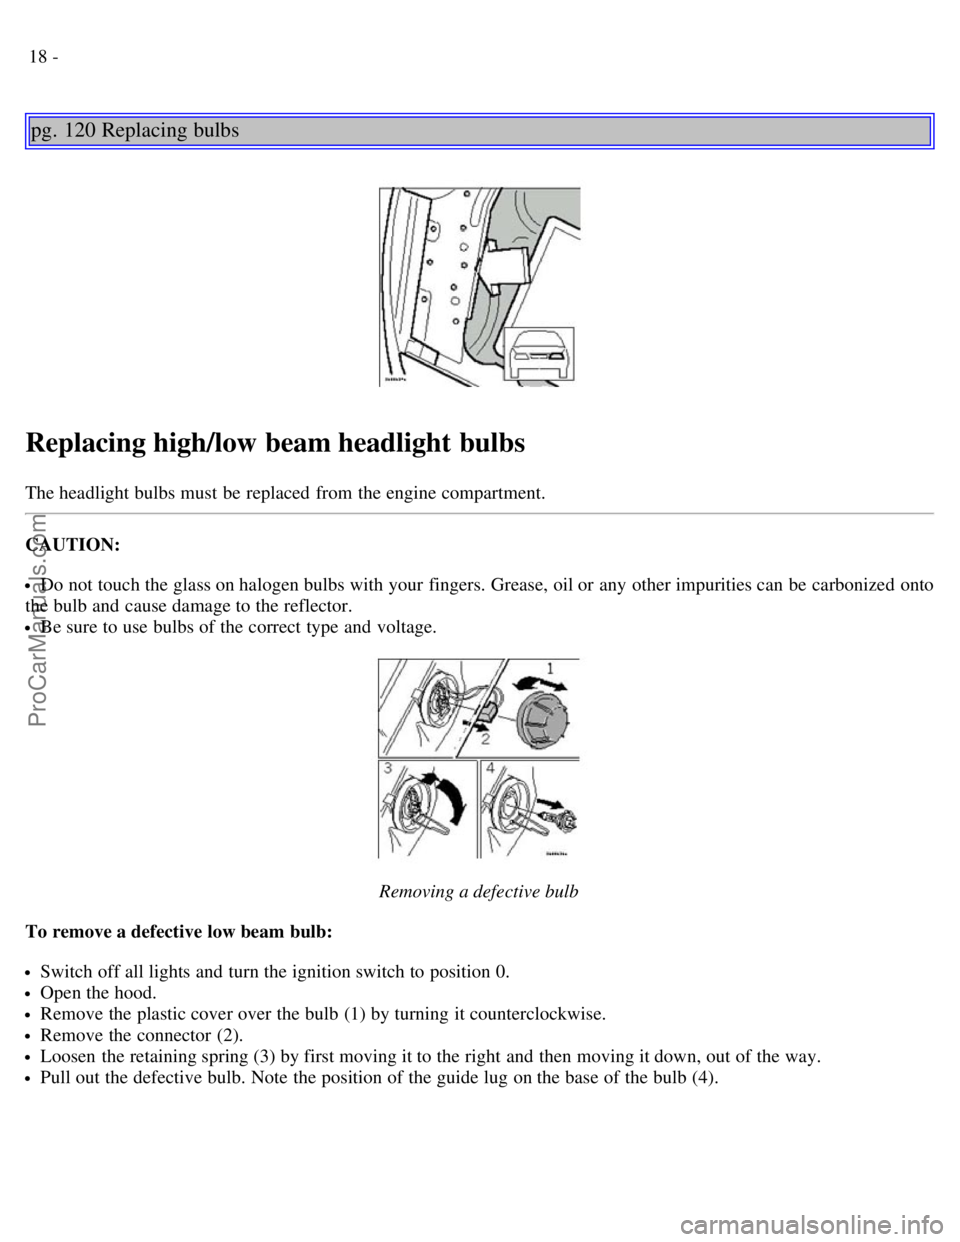 VOLVO V70 2003  Owners Manual 18 -
pg. 120 Replacing bulbs
Replacing high/low beam headlight bulbs
The headlight bulbs must  be  replaced  from  the engine compartment.
CAUTION:
Do not touch the glass on halogen bulbs with your fi